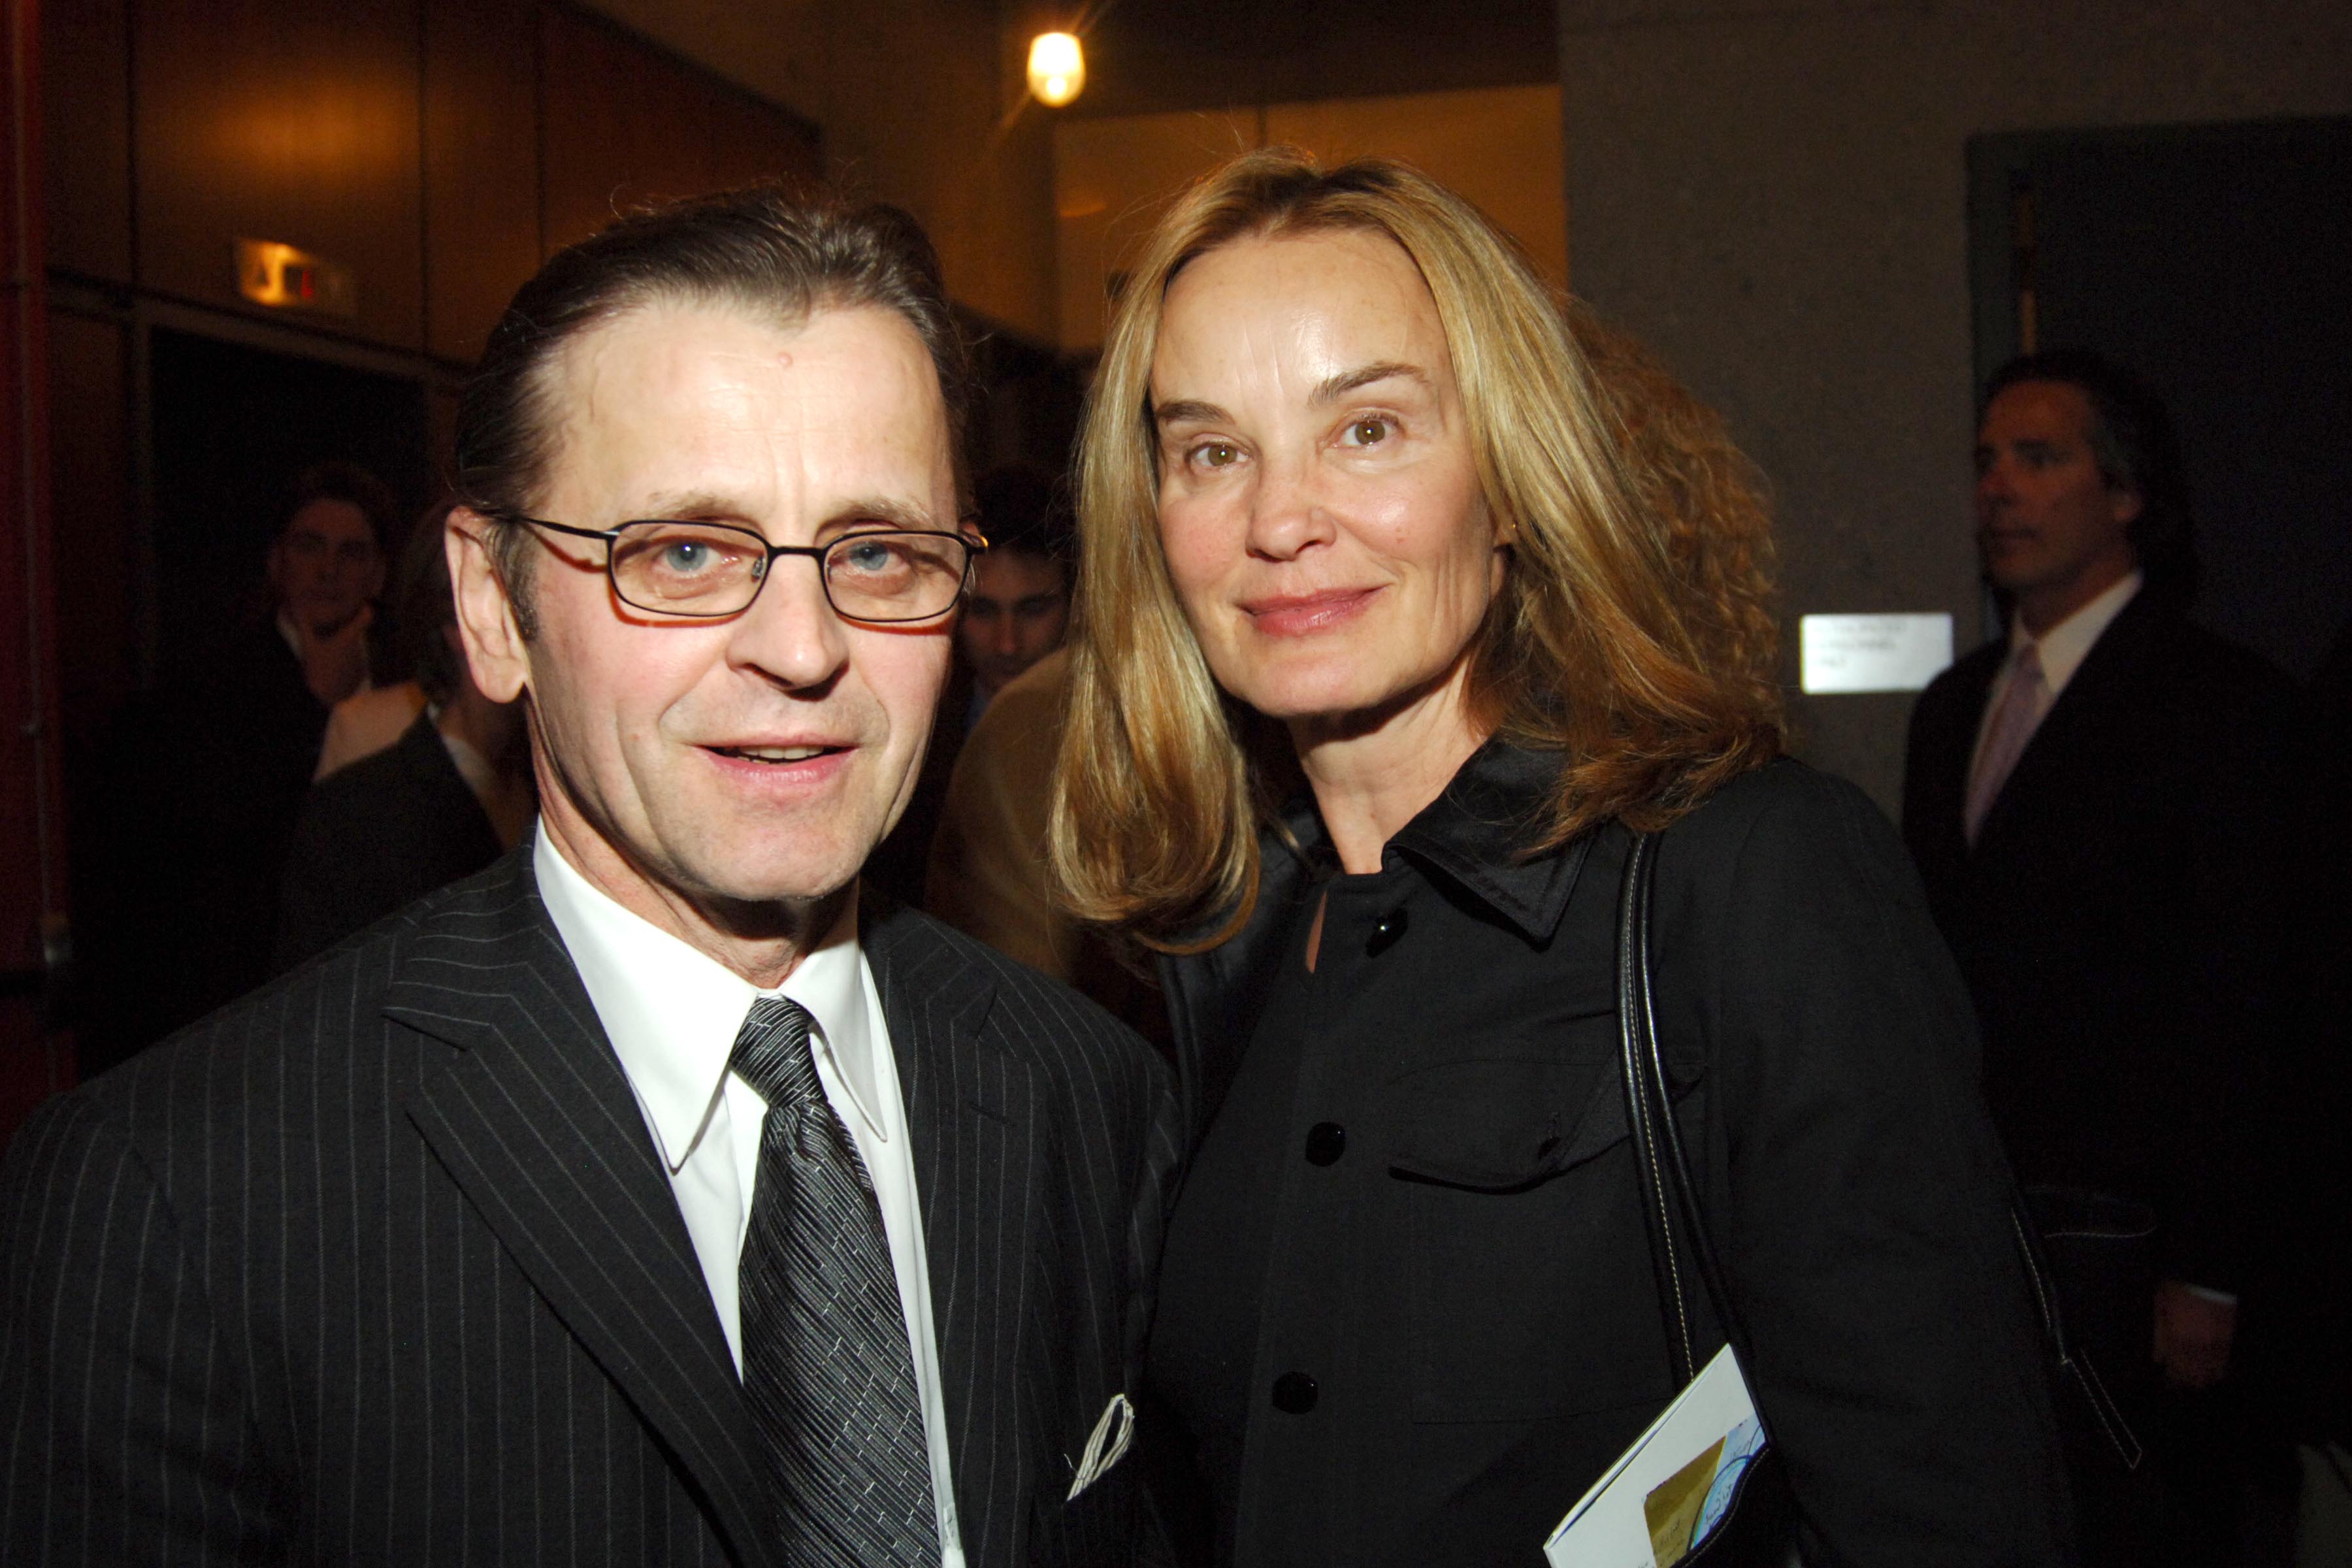 Mikhail Baryshnikov and Jessica Lange attend NFAA 2006 Arts Awards at The Baryshnikov Arts Center on April 24, 2006 in New York City | Photo: Getty Images